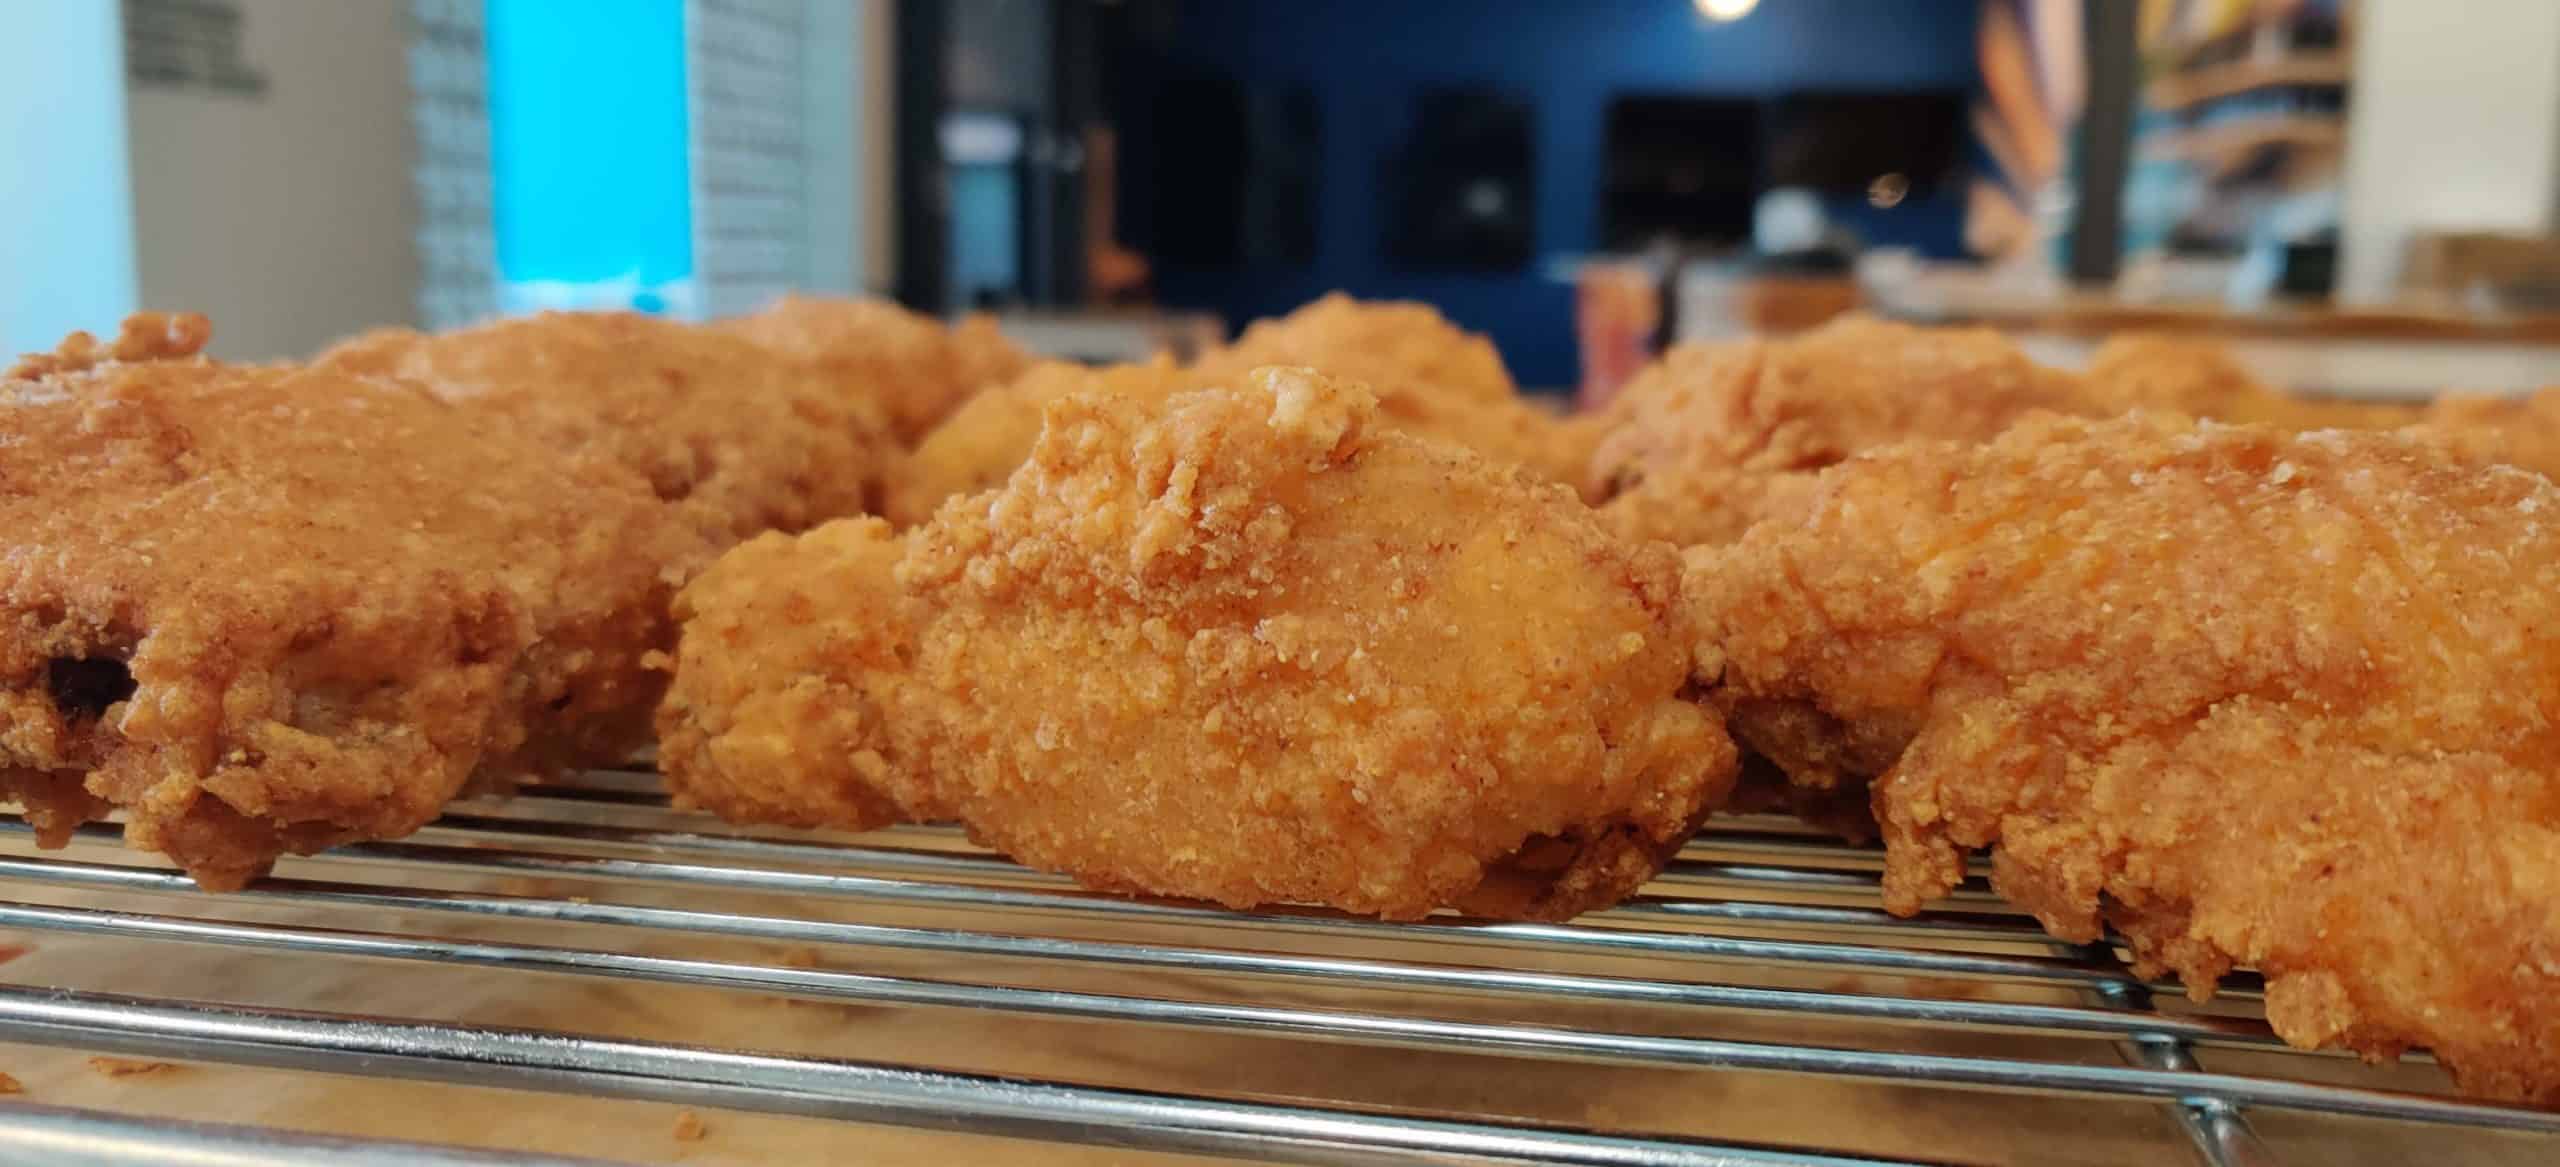 Gluten Free Fried Chicken at On Rotation